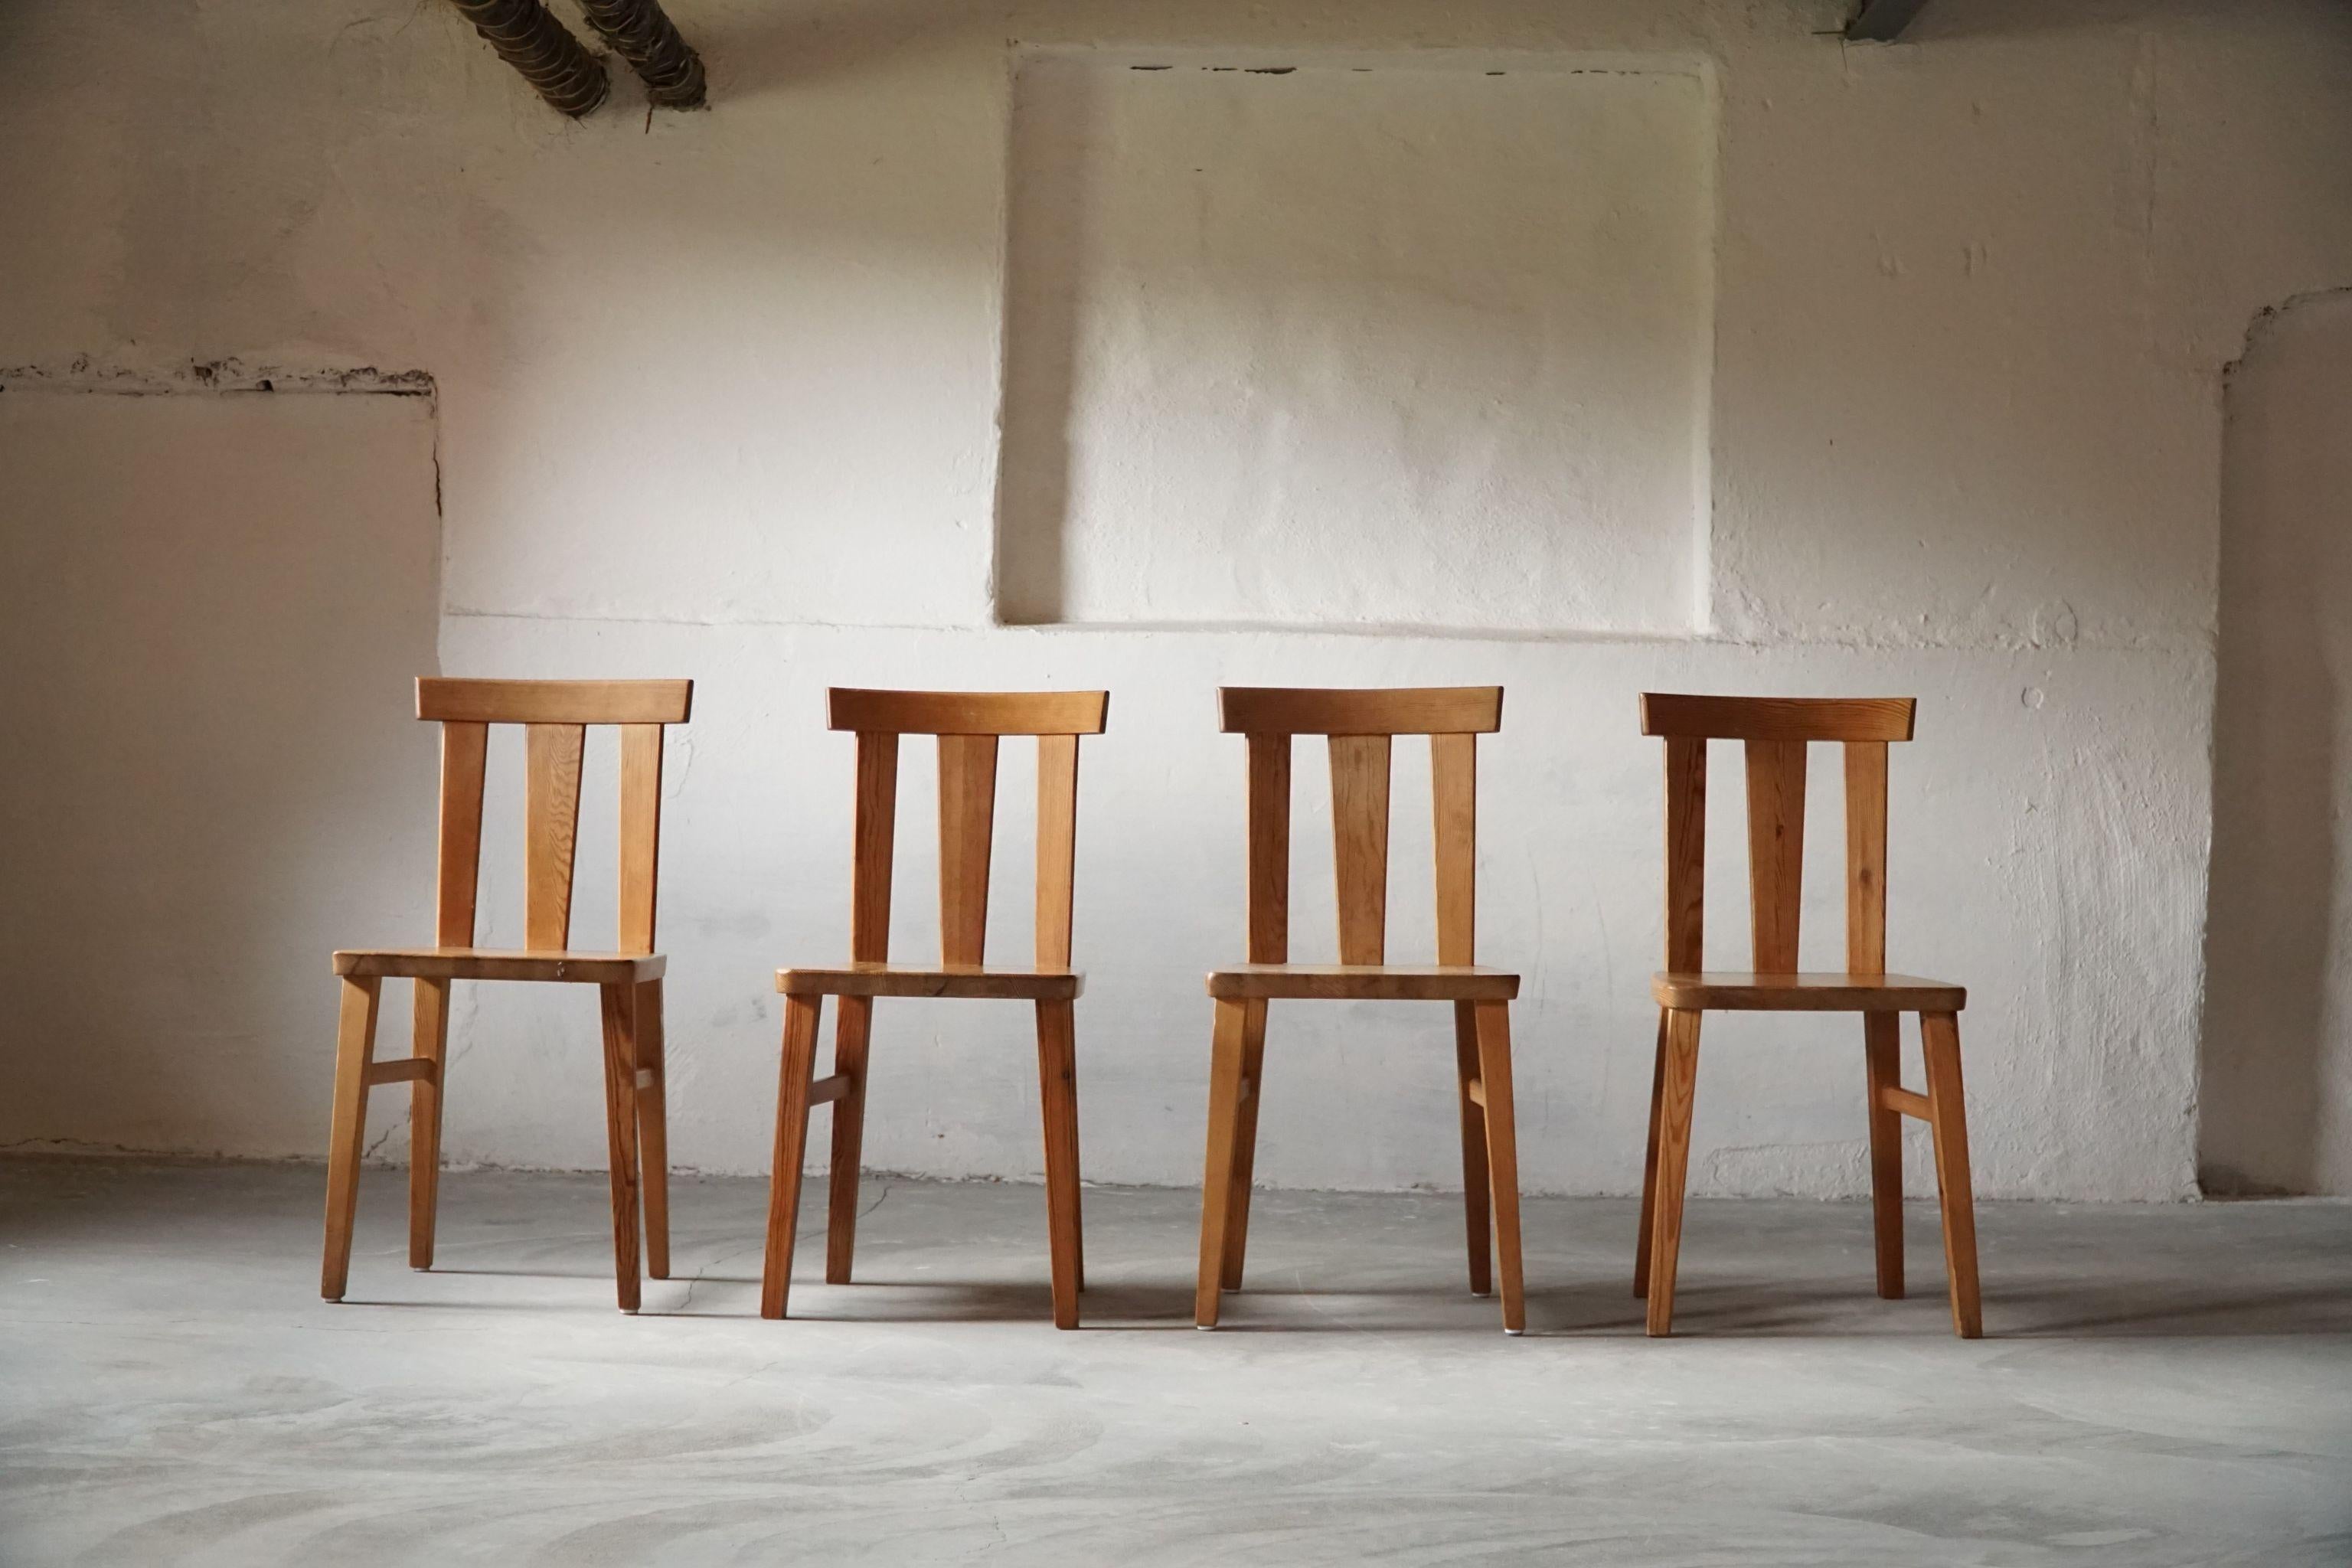 Hand-Crafted Set of 4 Swedish Modern Chairs in Solid Pine, Axel Einar Hjorth Style, 1930s For Sale